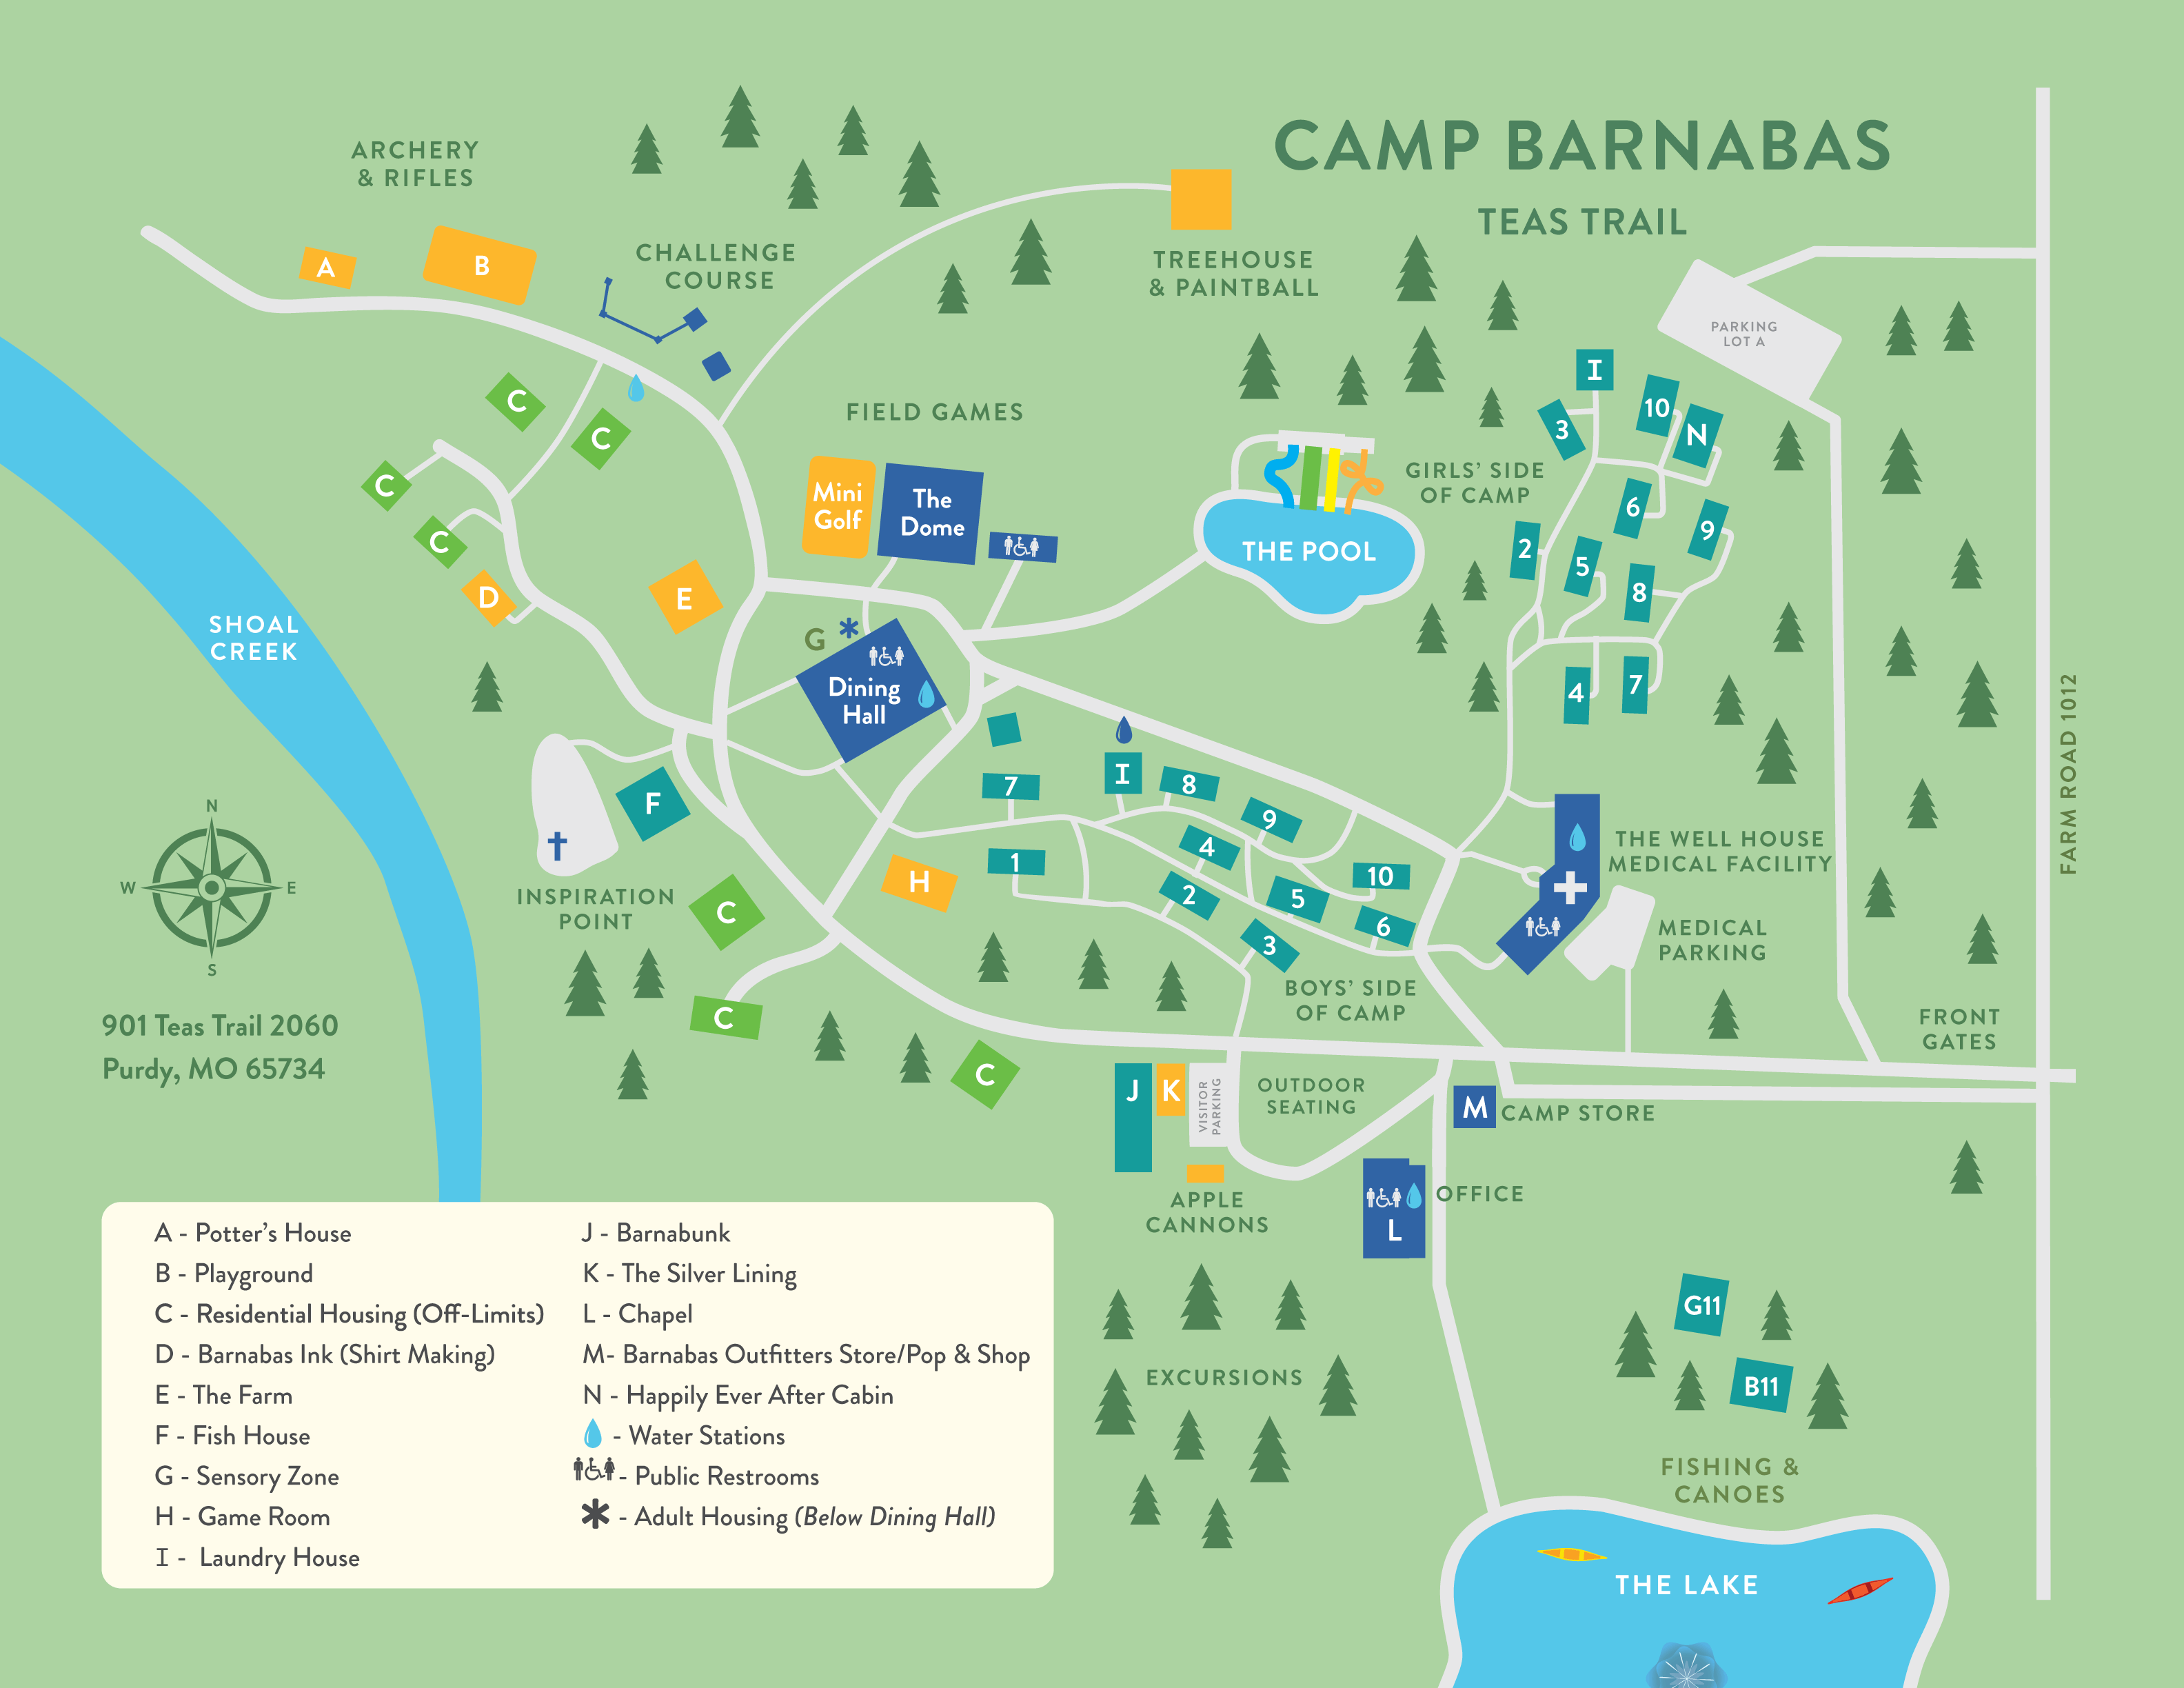 Camp barnabas map colored green